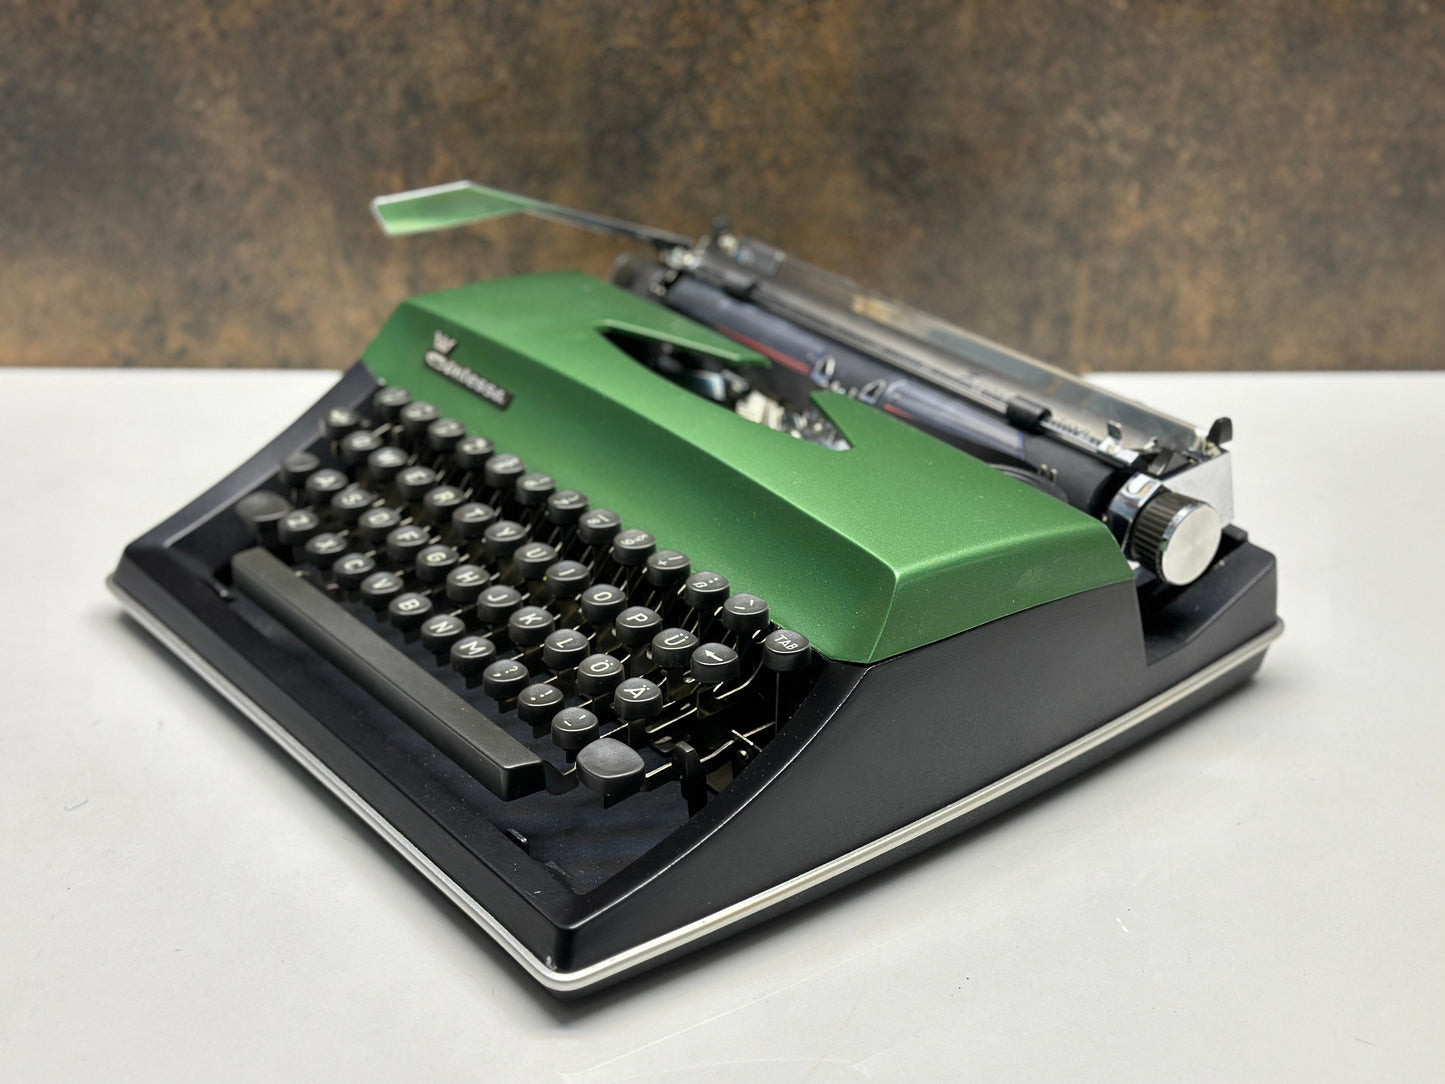 Qwerty Adler Contessa Deluxe Typewriter - Retro Design - Fully Functional - Classic Office Accessory / Black Typewriter